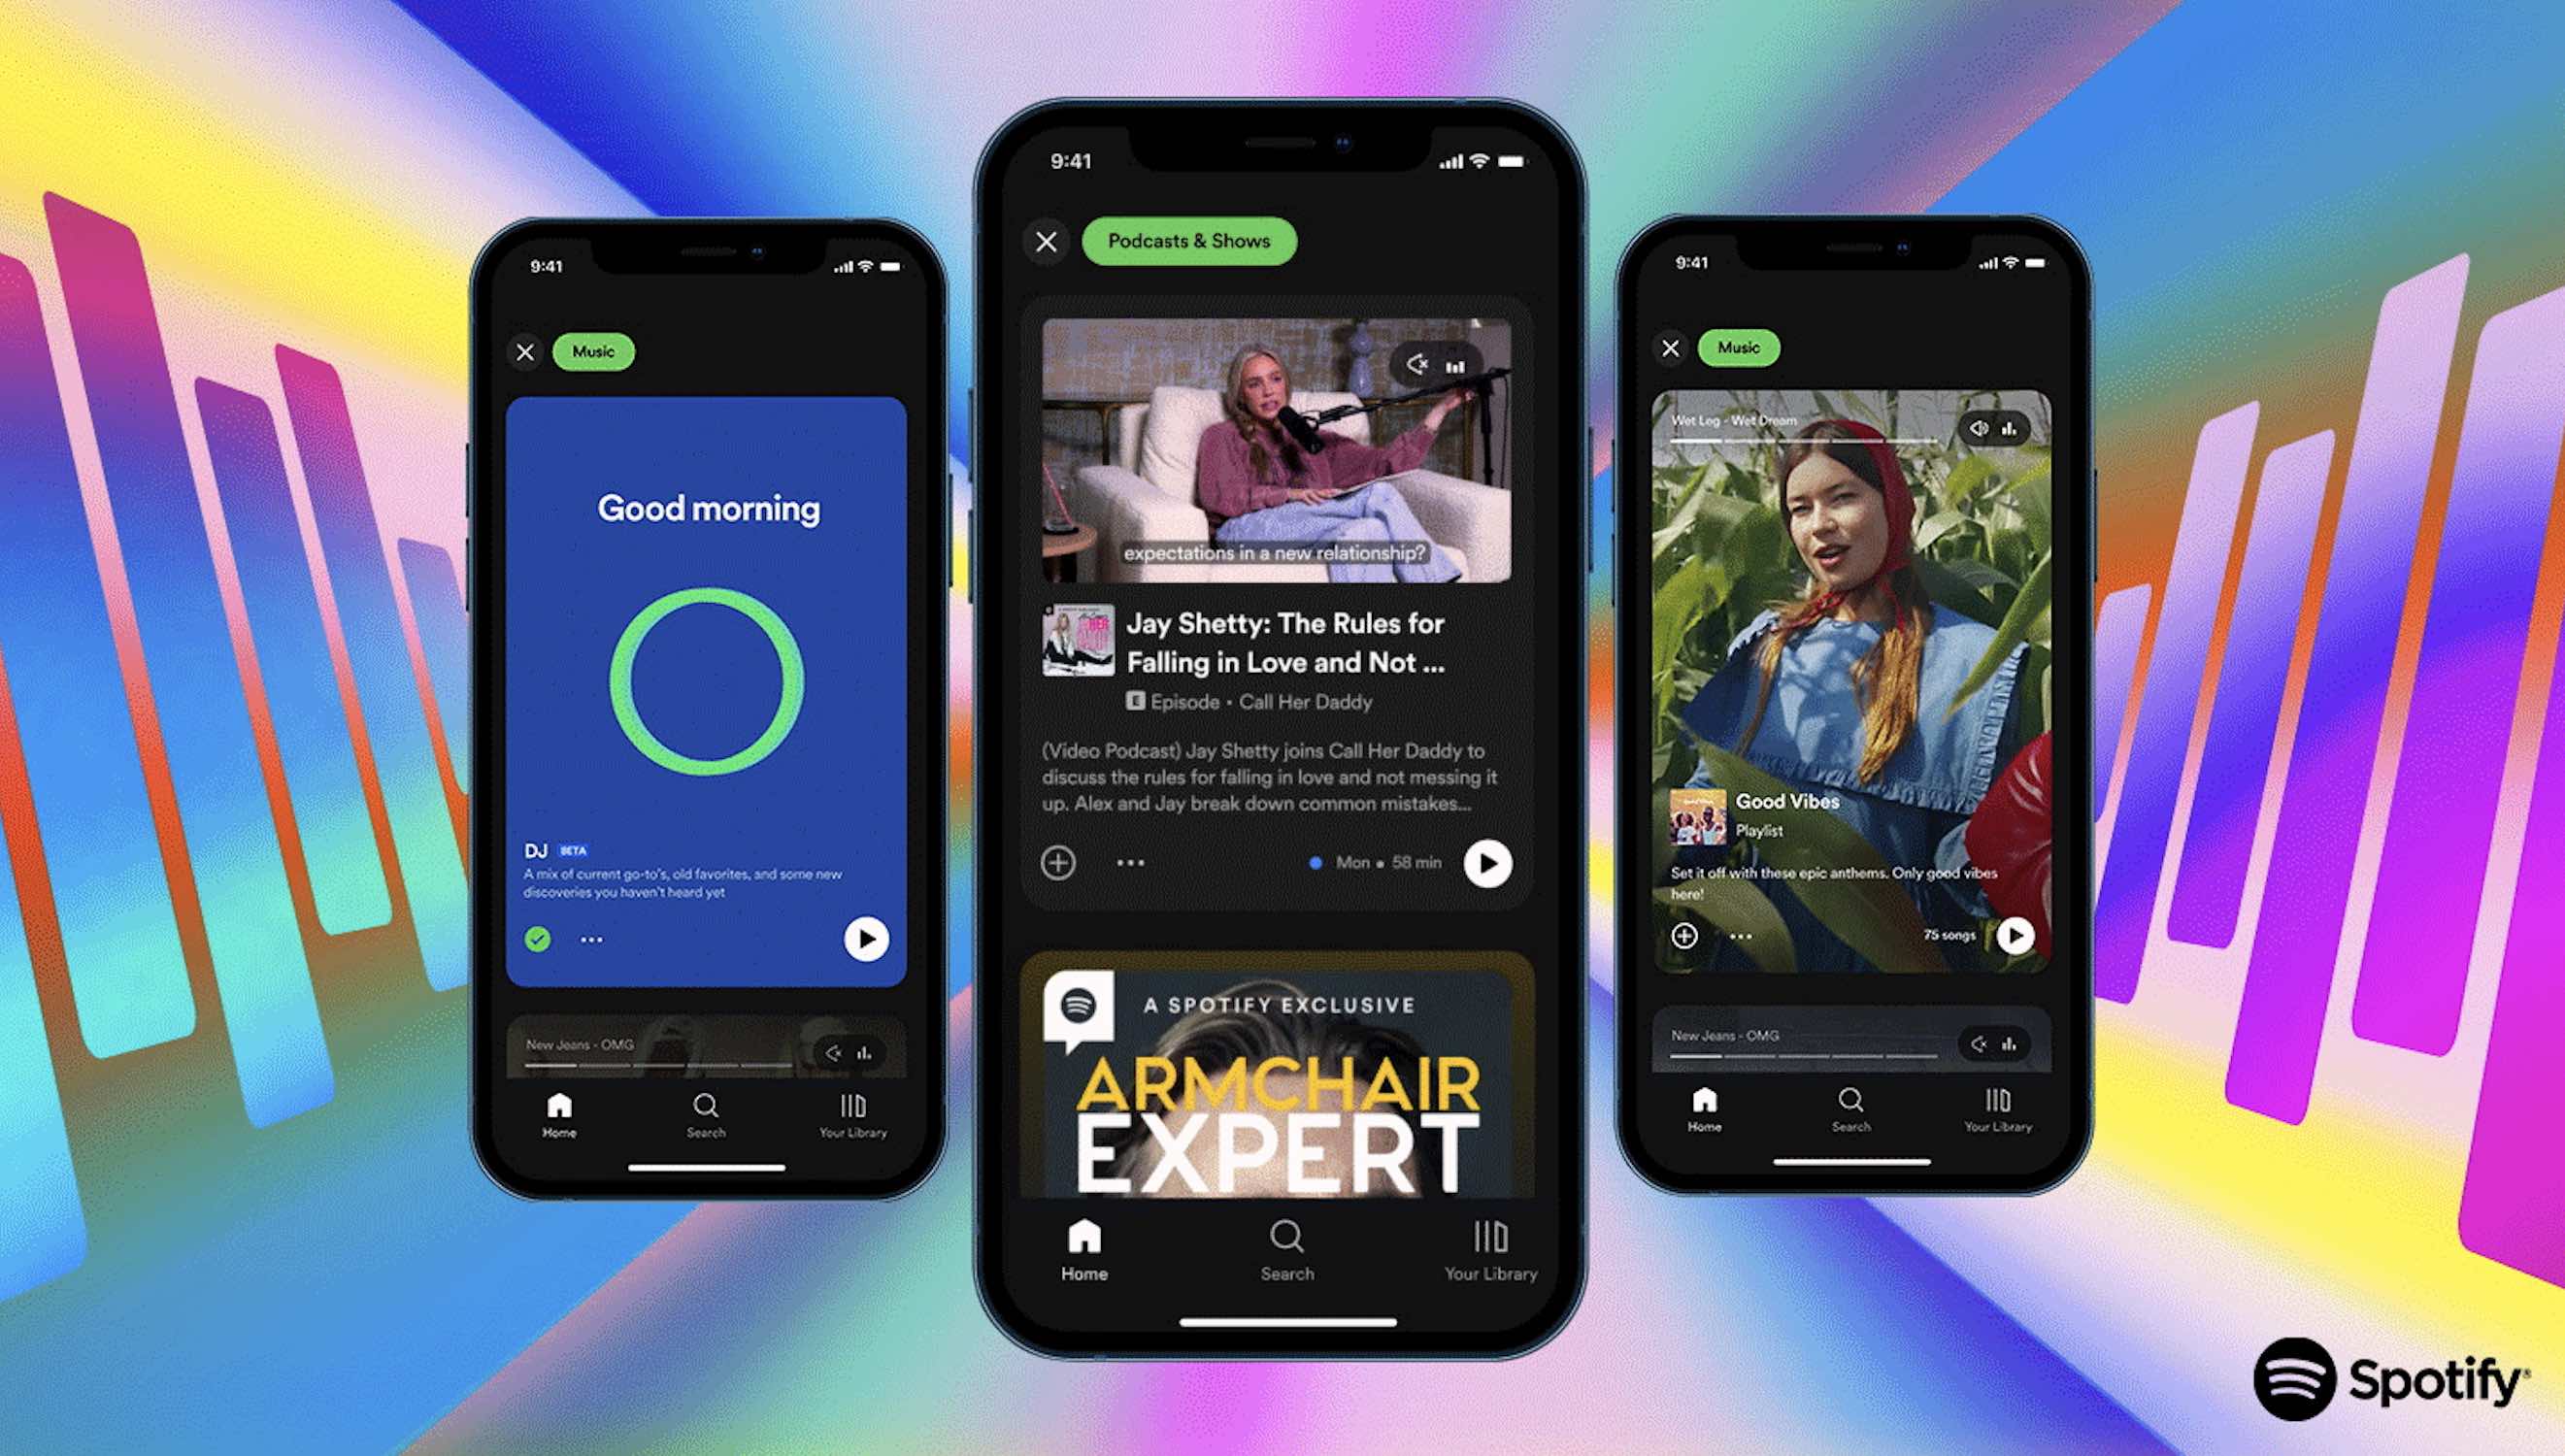 Spotify rolling out ‘biggest evolution yet’ with new TikTok-style Home feed on iOS and Android